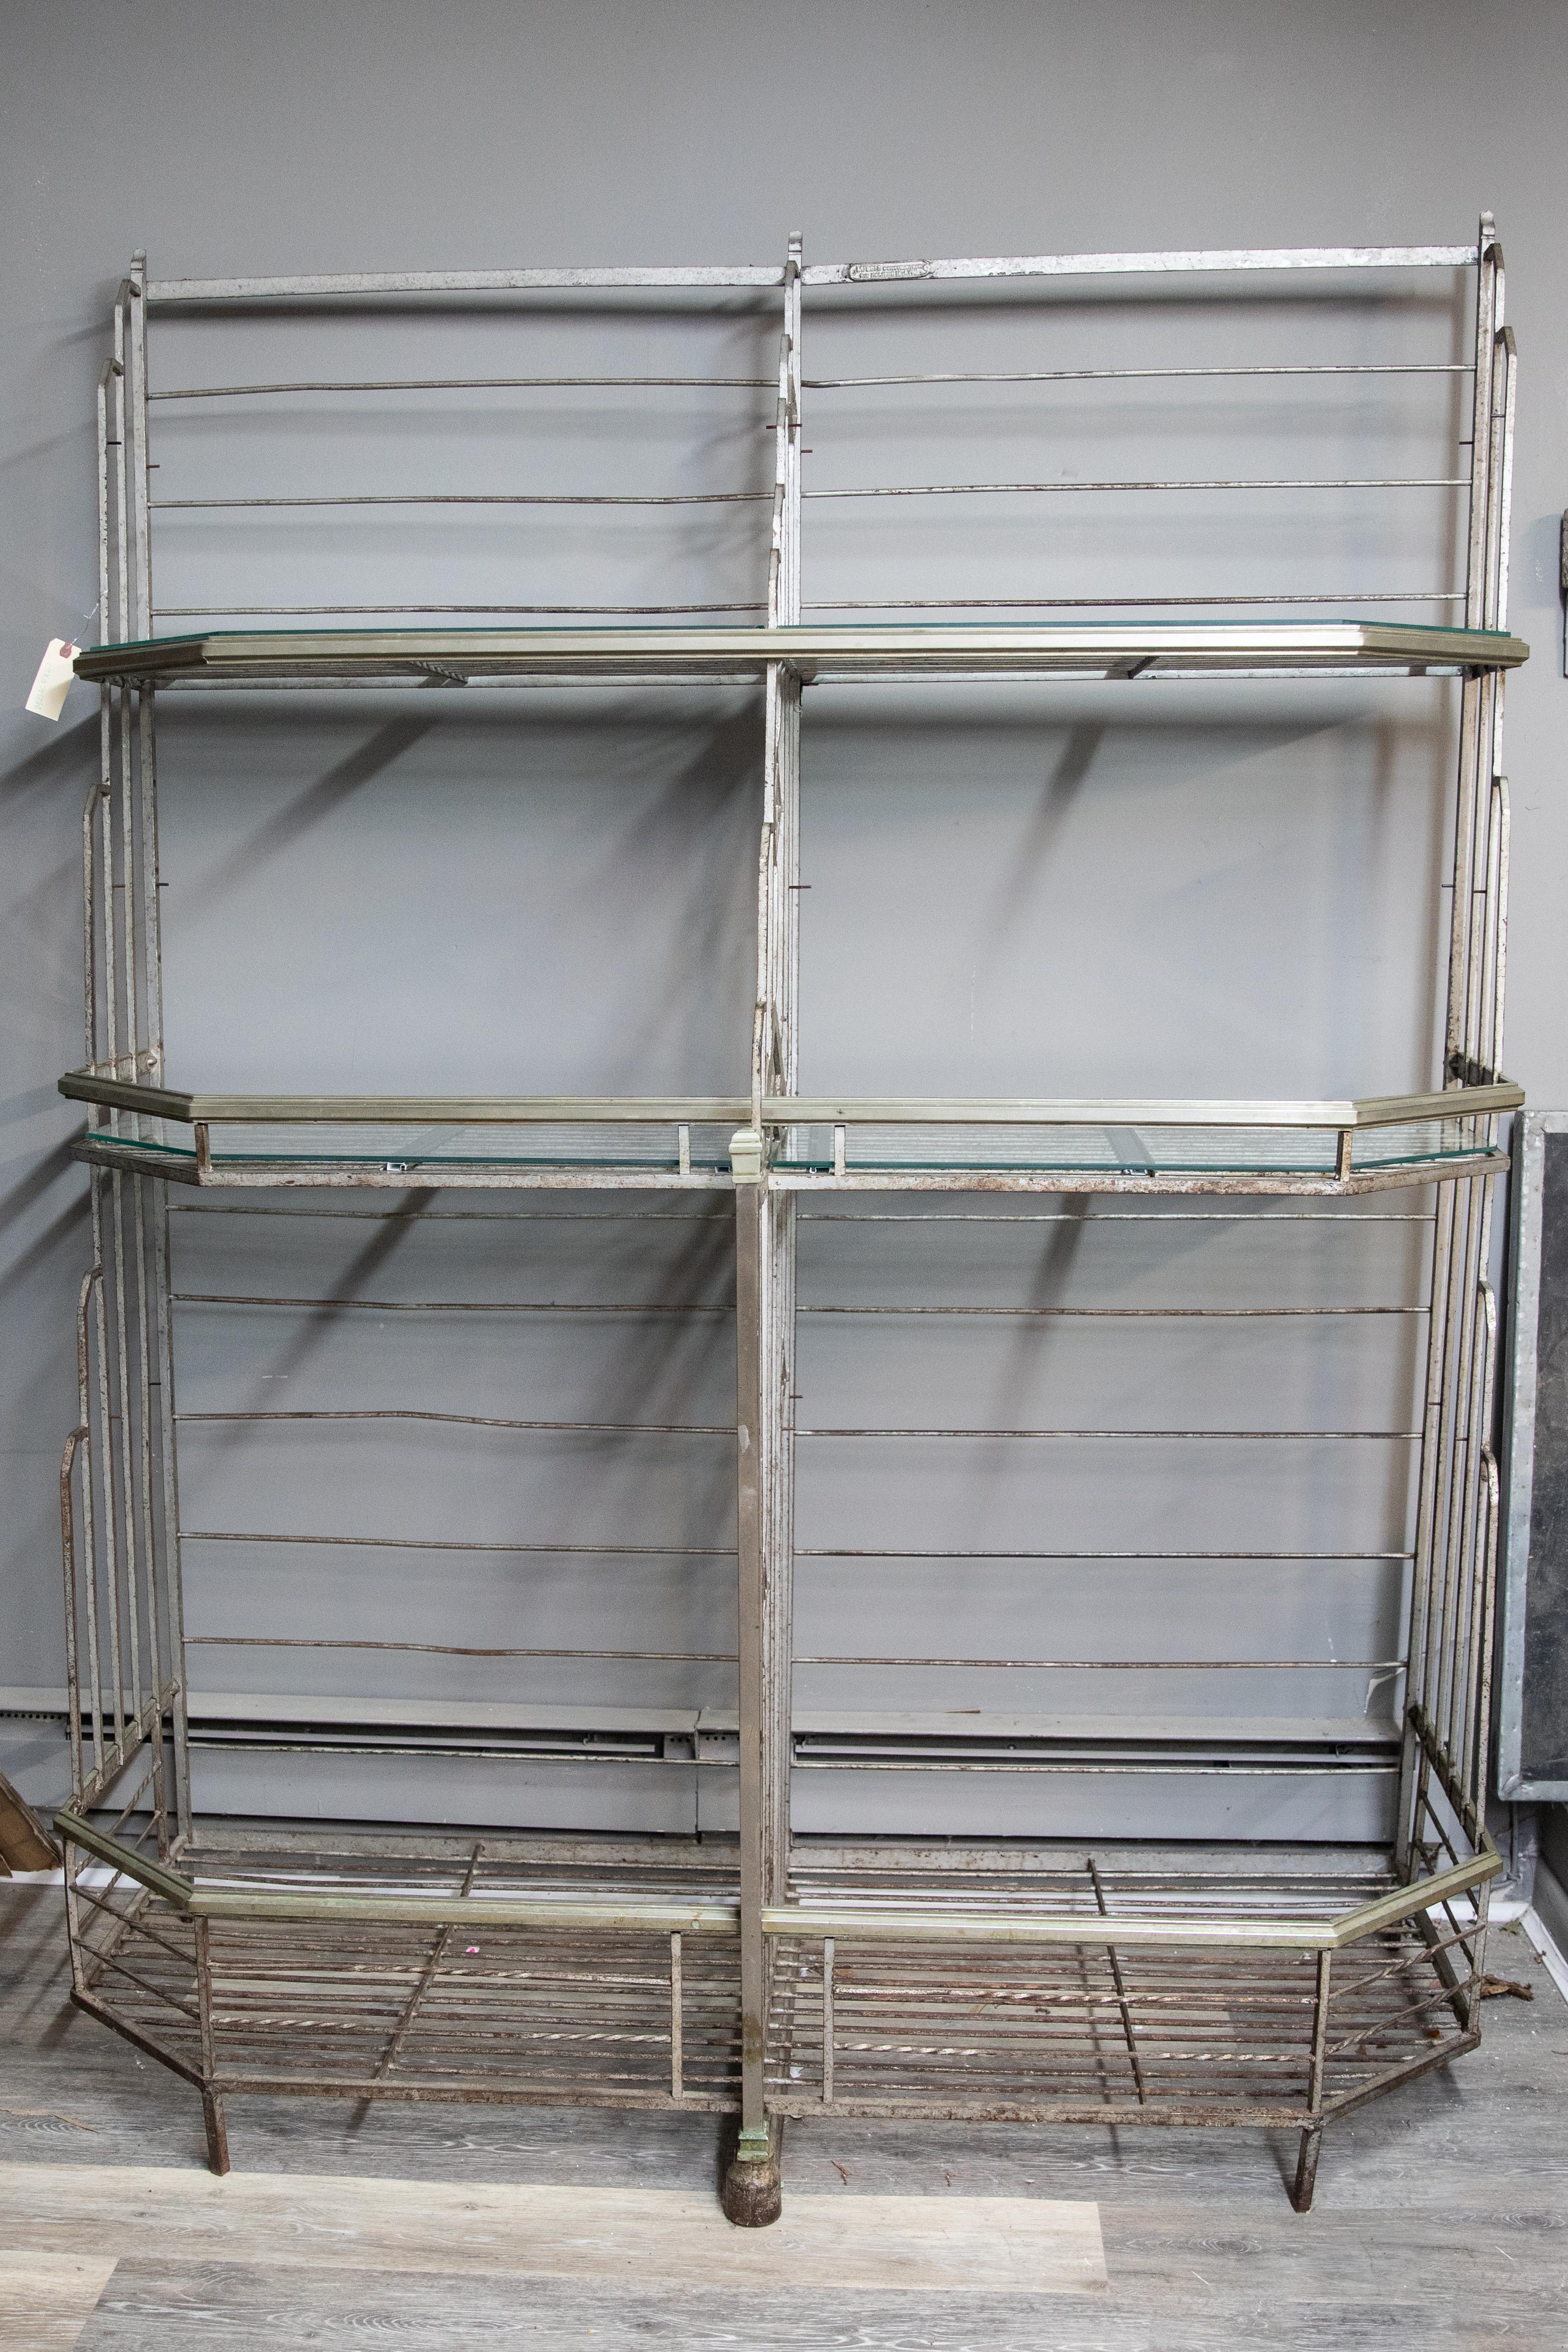 This is a stunning French Art Deco bakers rack marked Lyon, France. It has been fitted with glass shelves except for the bottom two. It is a sculptural and geometric beauty that combines form and function. This iron rack has a large open gallery at